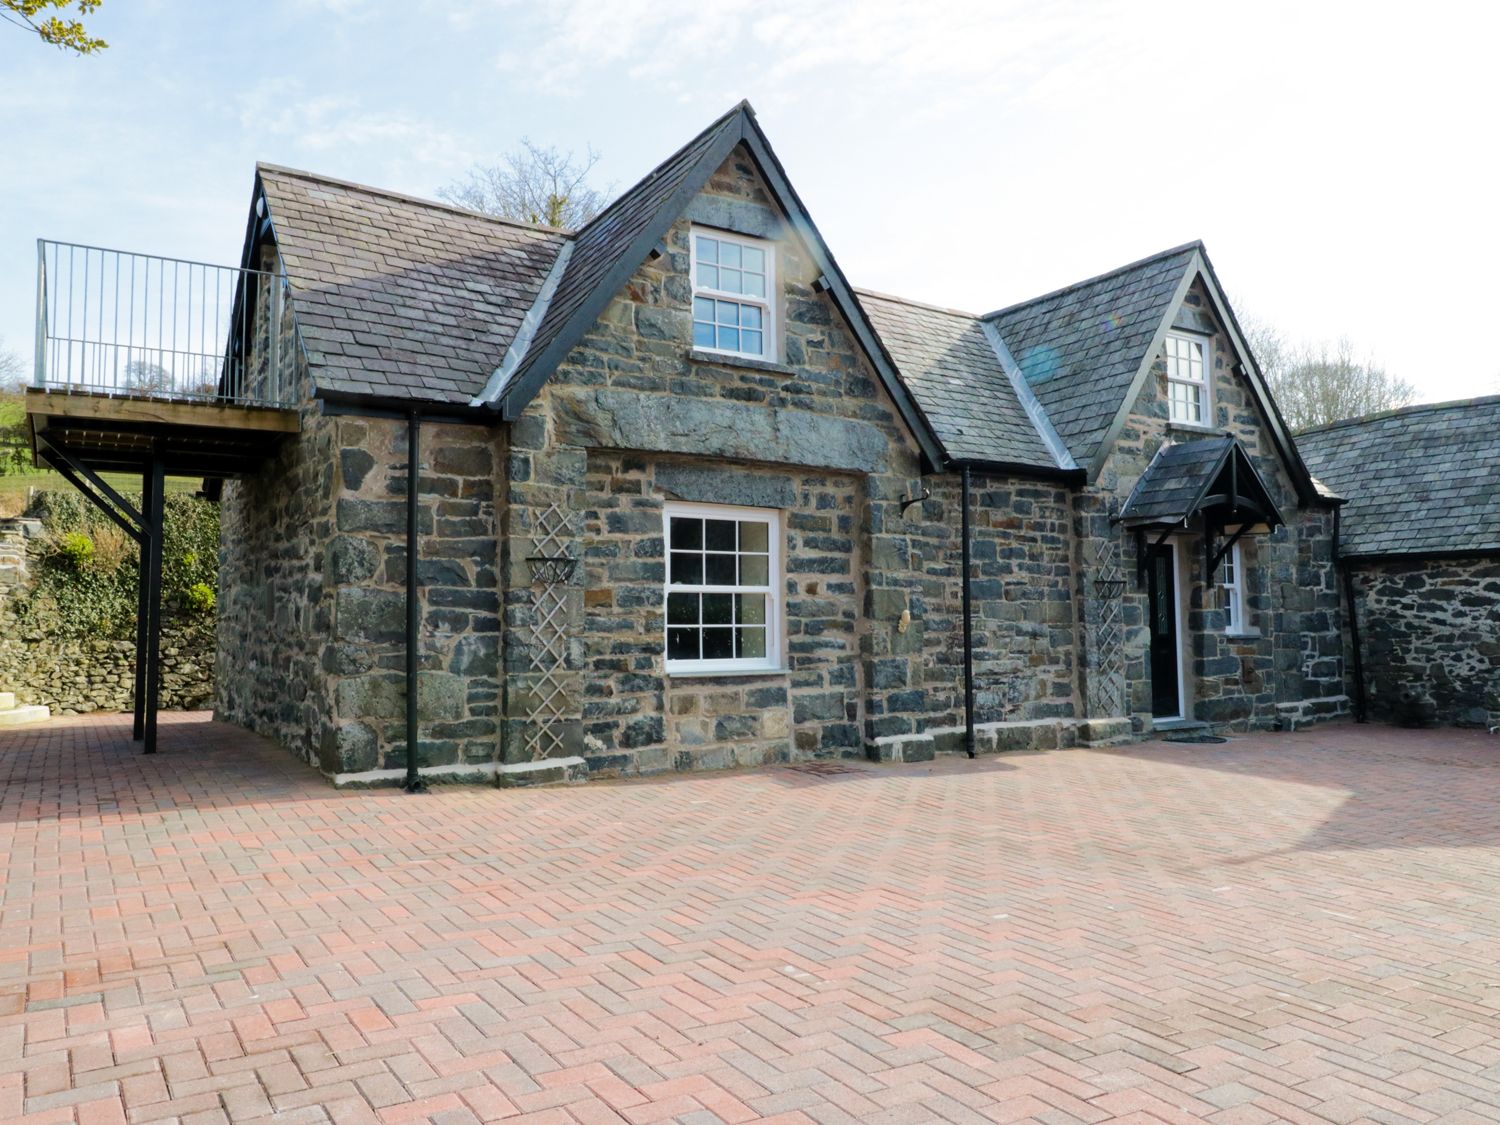 The Coach House, Snowdonia National Park